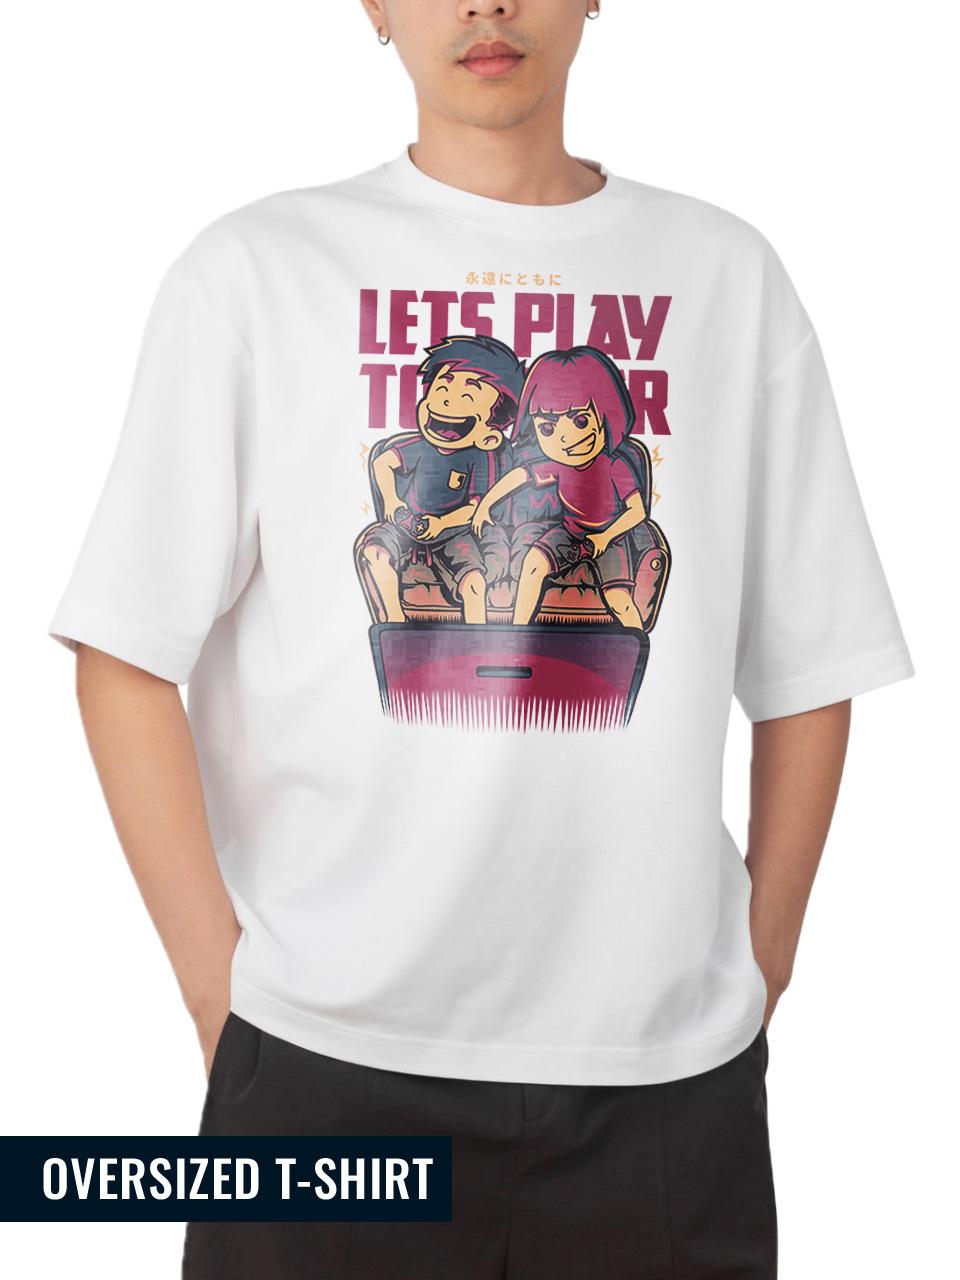 Sibling Playtime Oversized T-shirt 